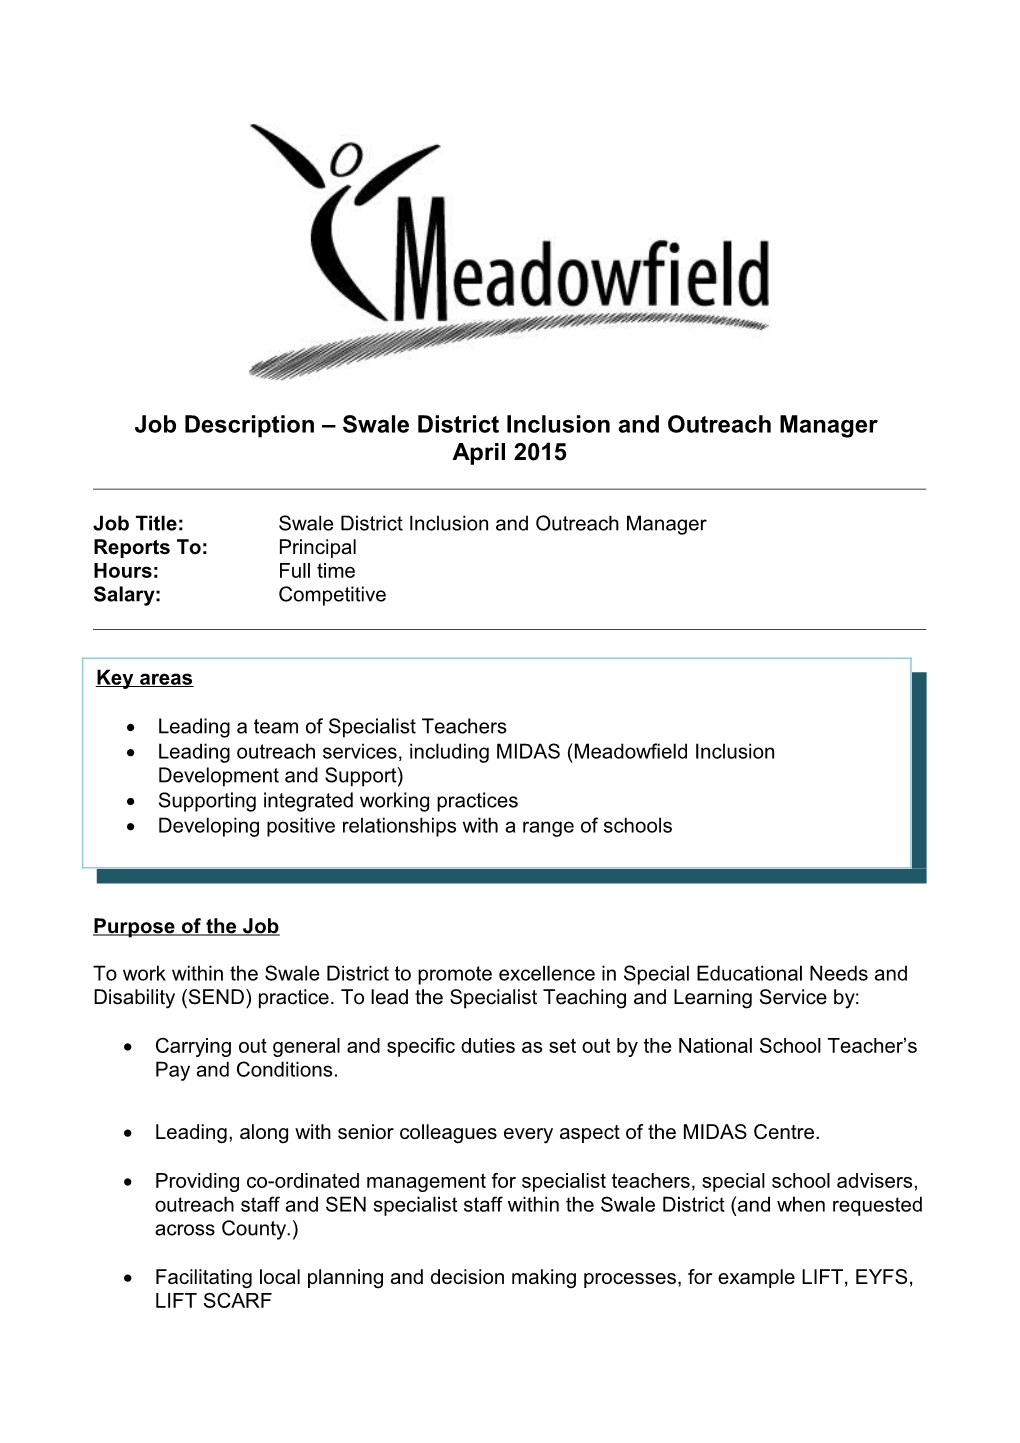 Job Description Swale District Inclusion and Outreach Manager